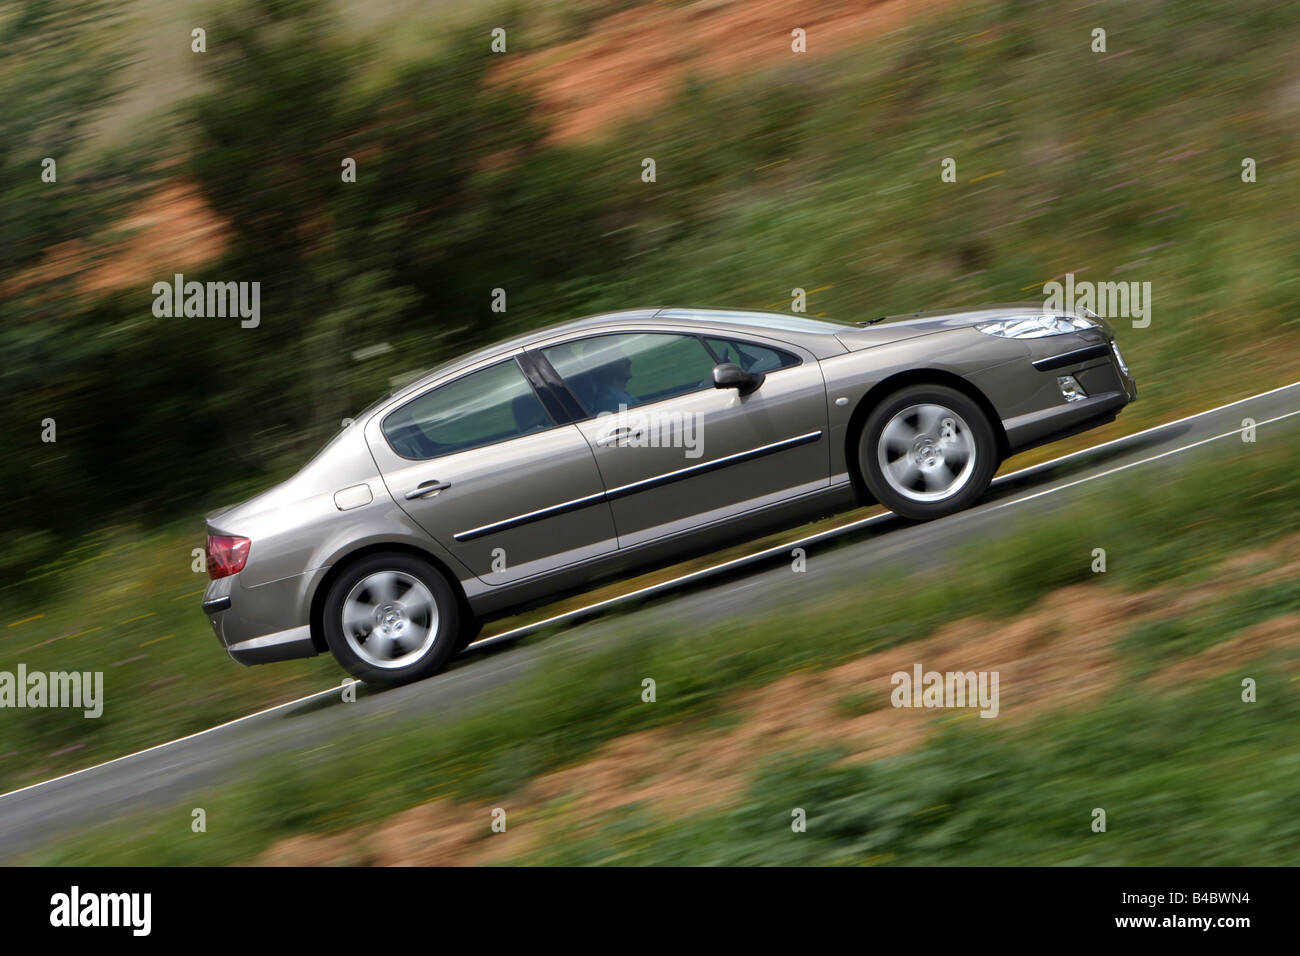 Peugeot 407 HDi 170 Bi-Turbo, model year 2006-, silver, driving, side view,  country road Stock Photo - Alamy